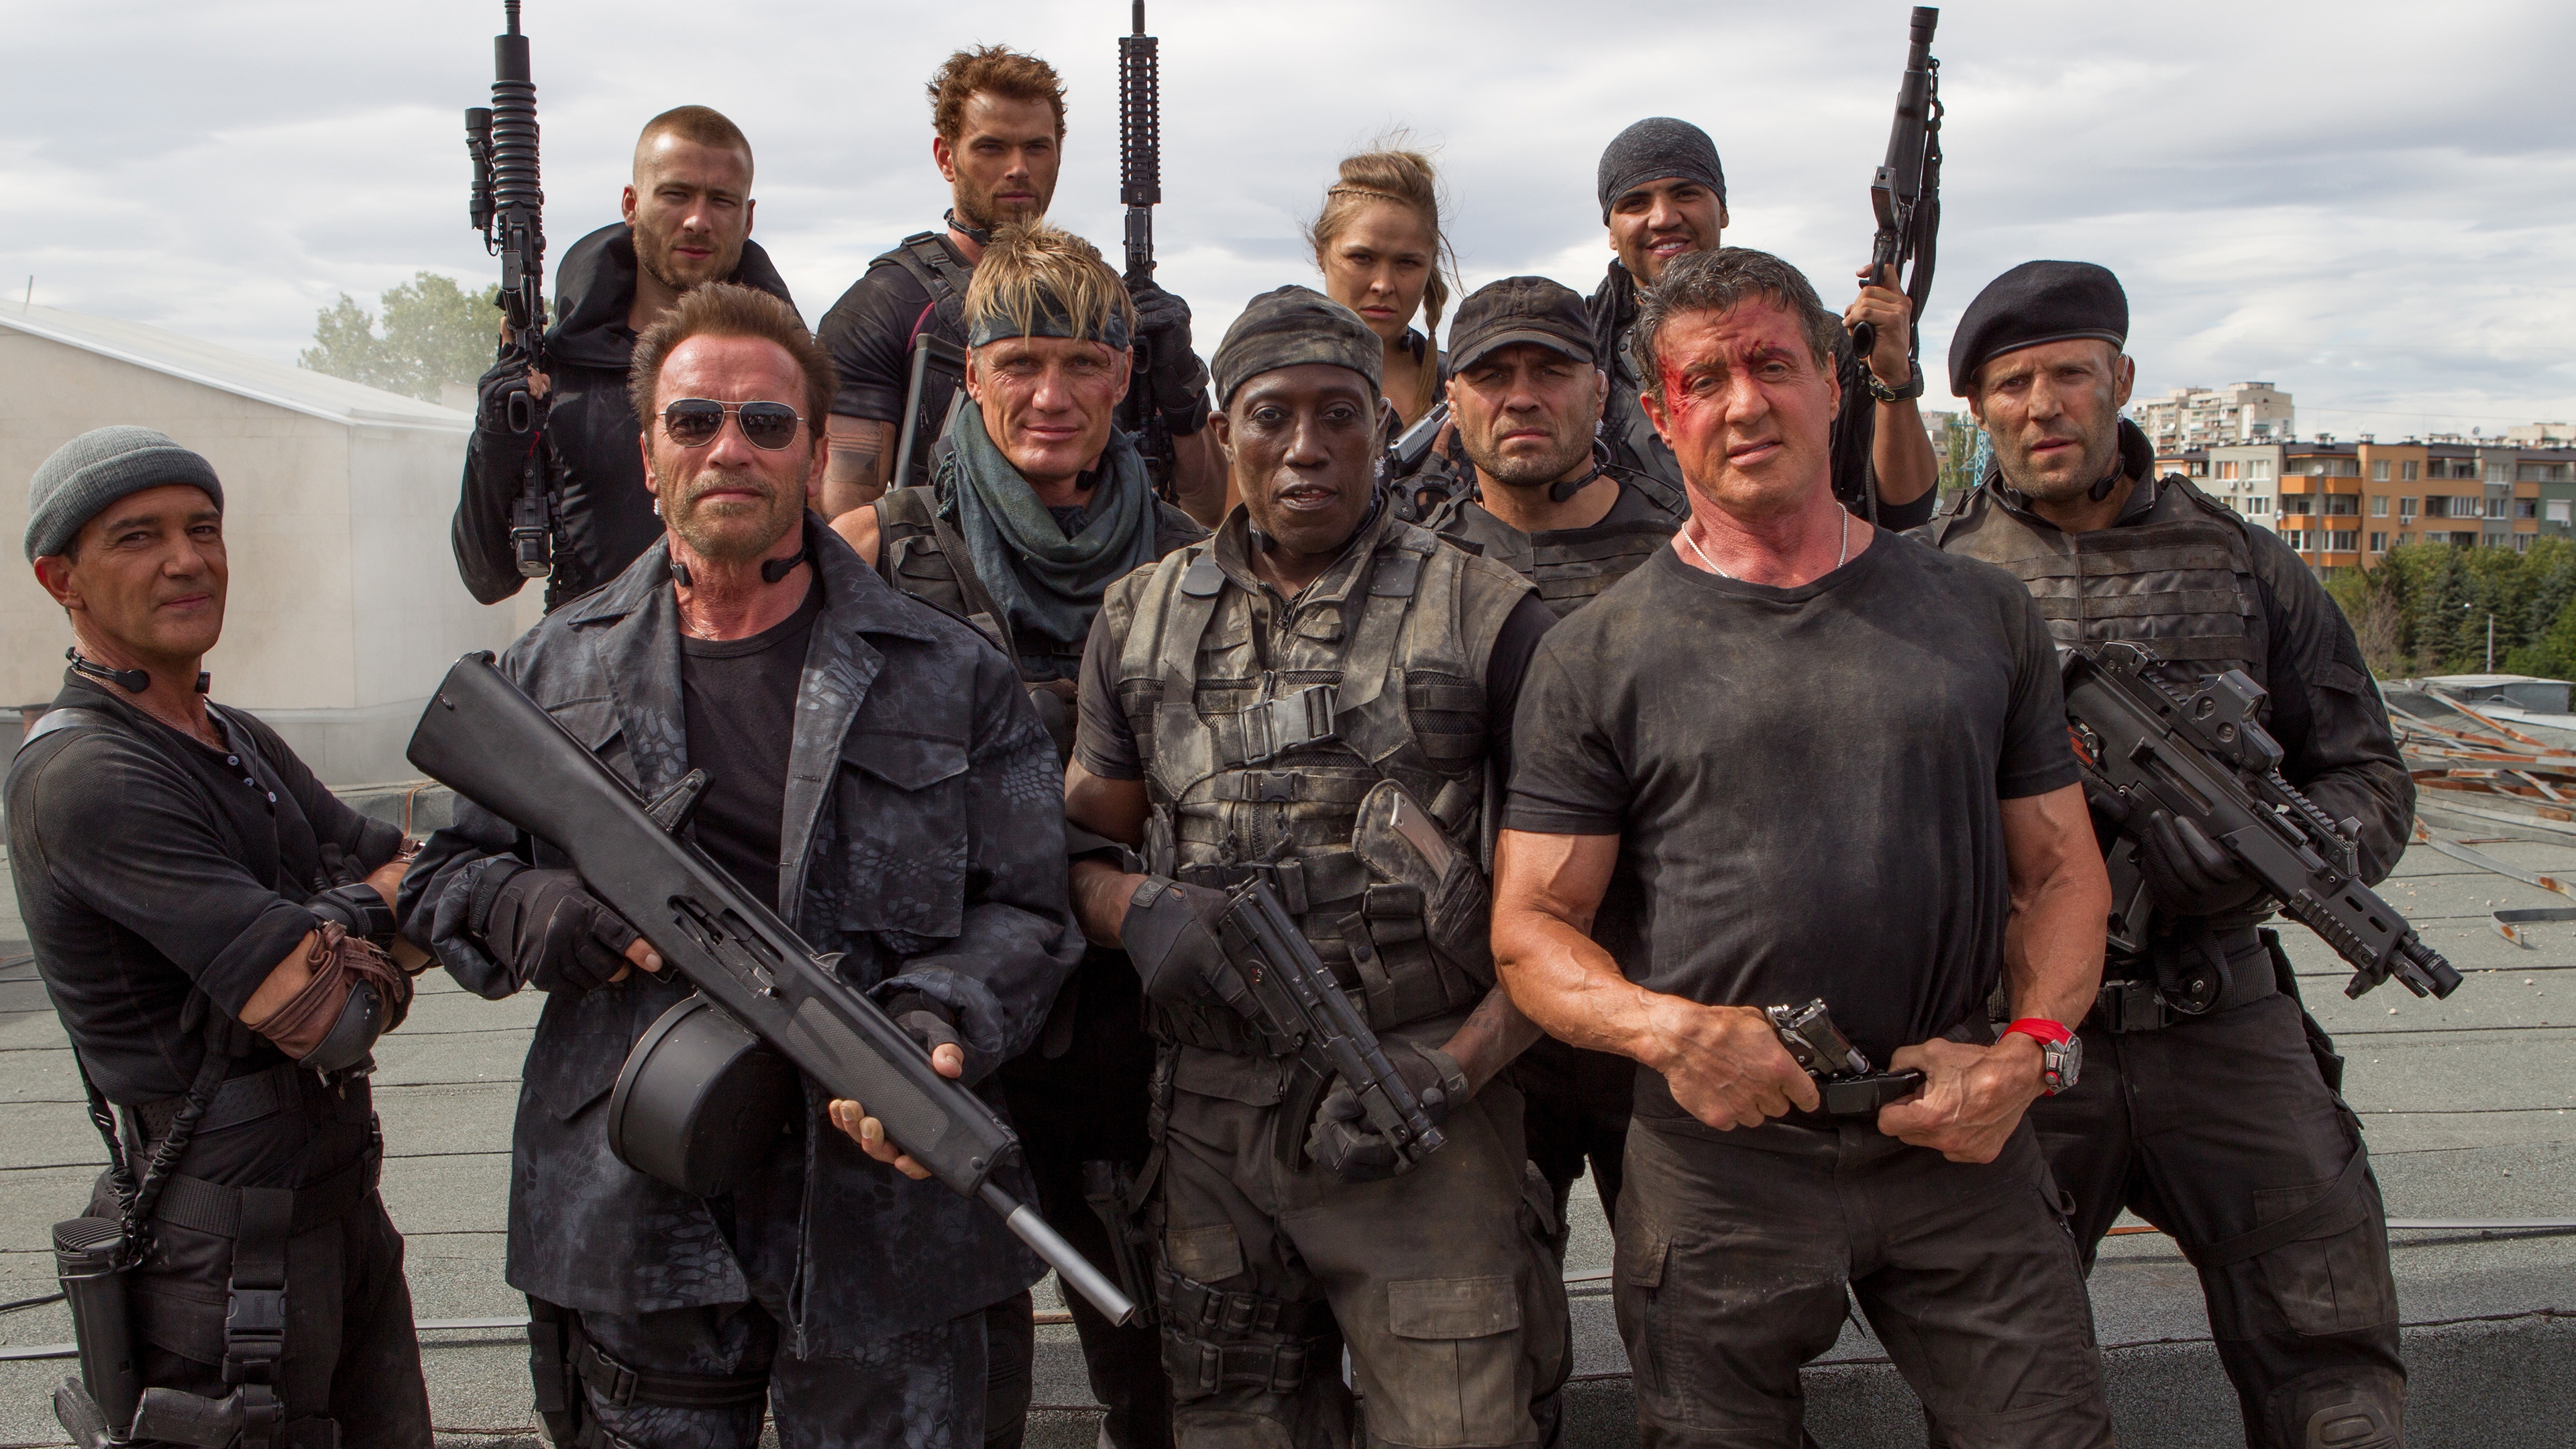 The Expendables 3 Cast for 3840 x 2160 Ultra HD resolution